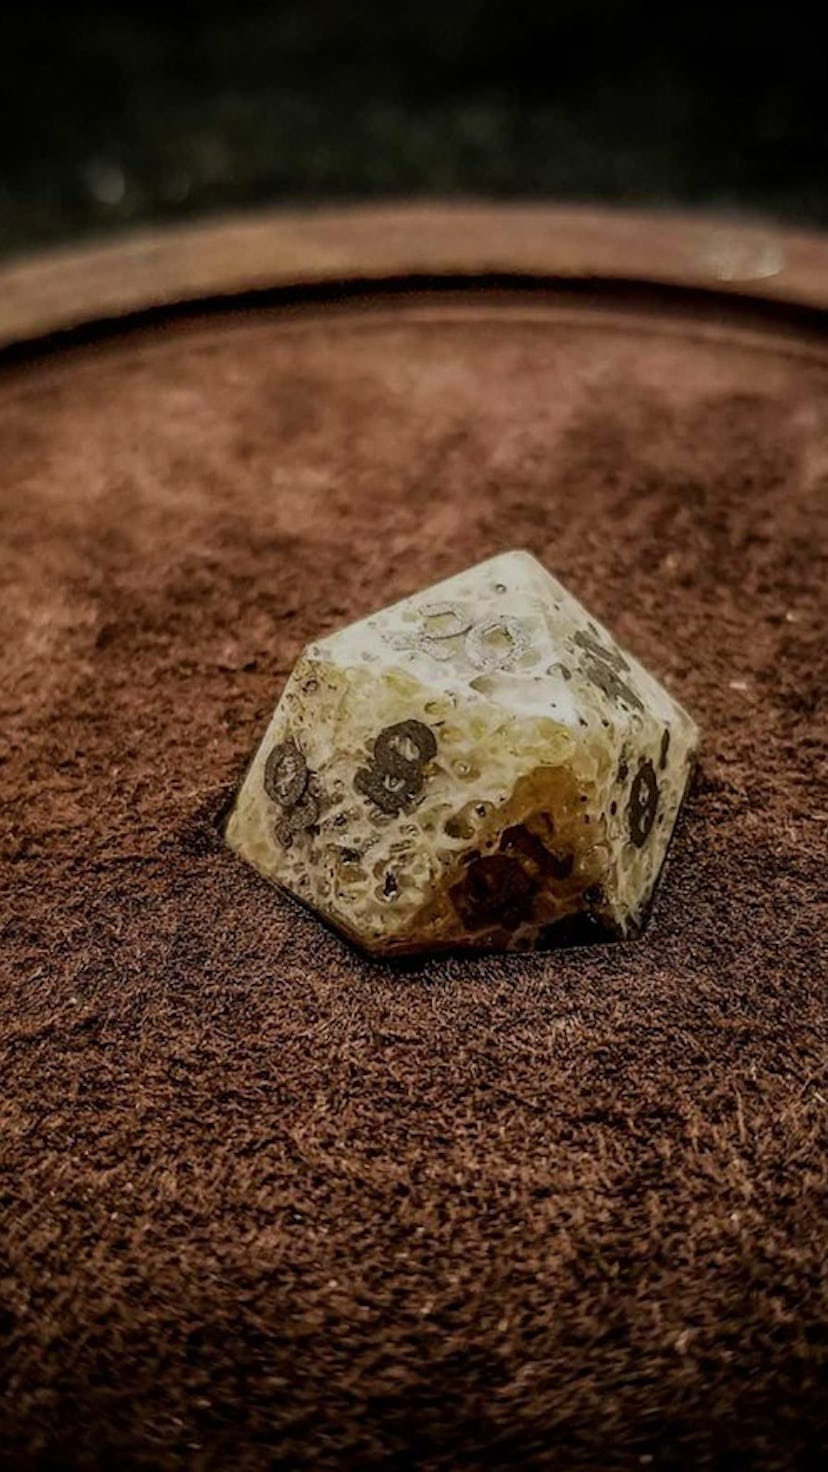 A d20 made from human bone by Artisan Dice in Dallas Texas